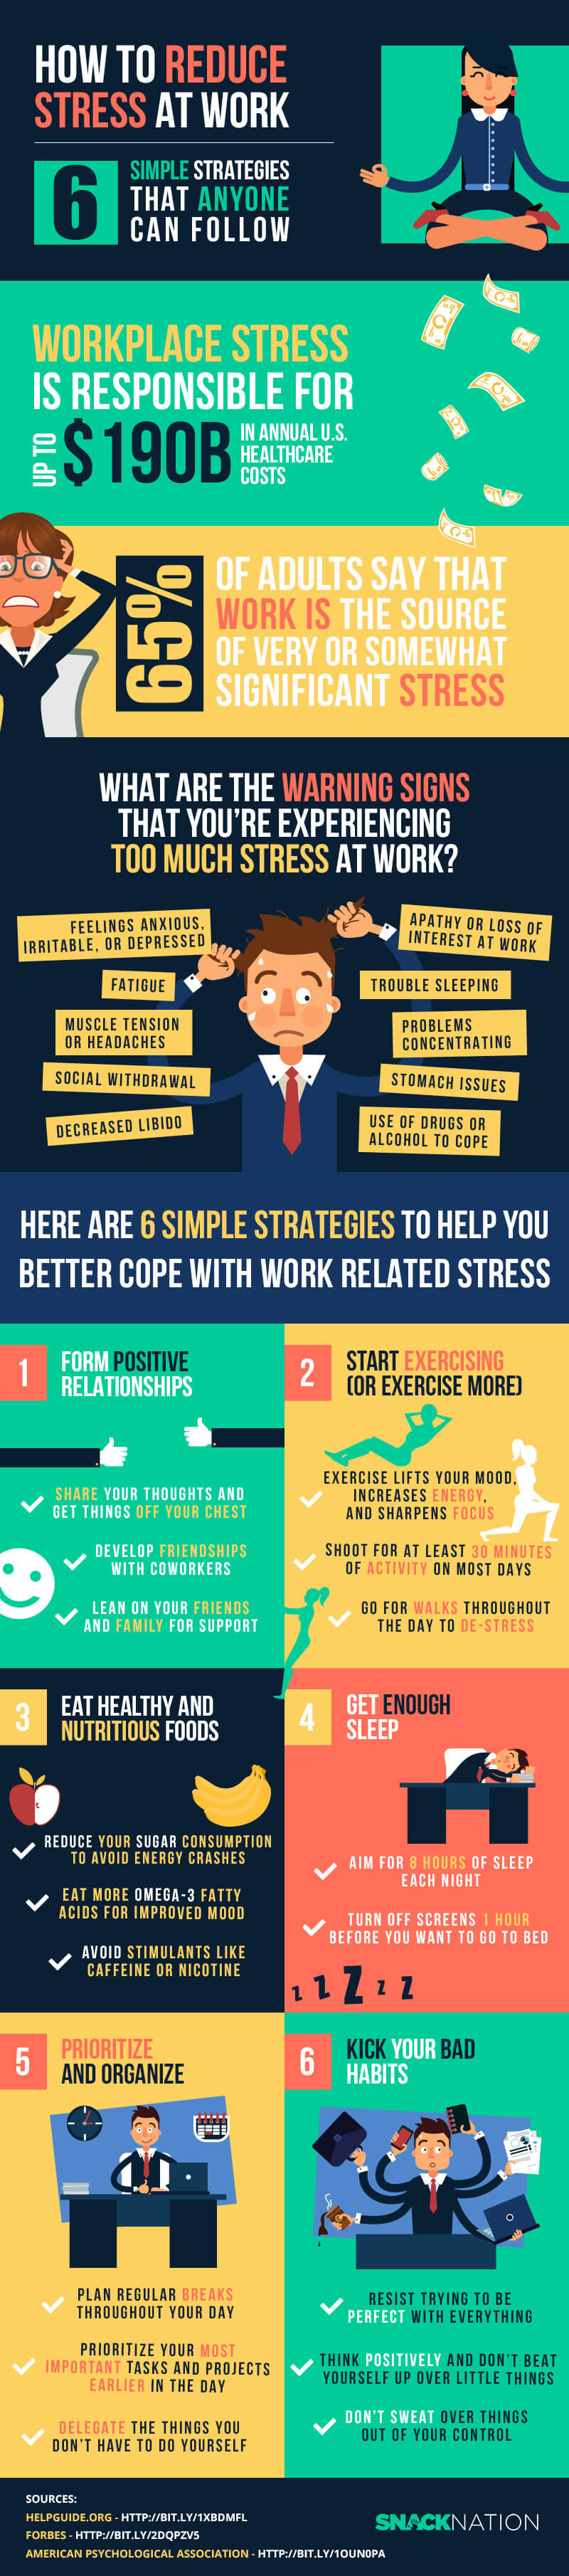 how-to-reduce-stress-at-work